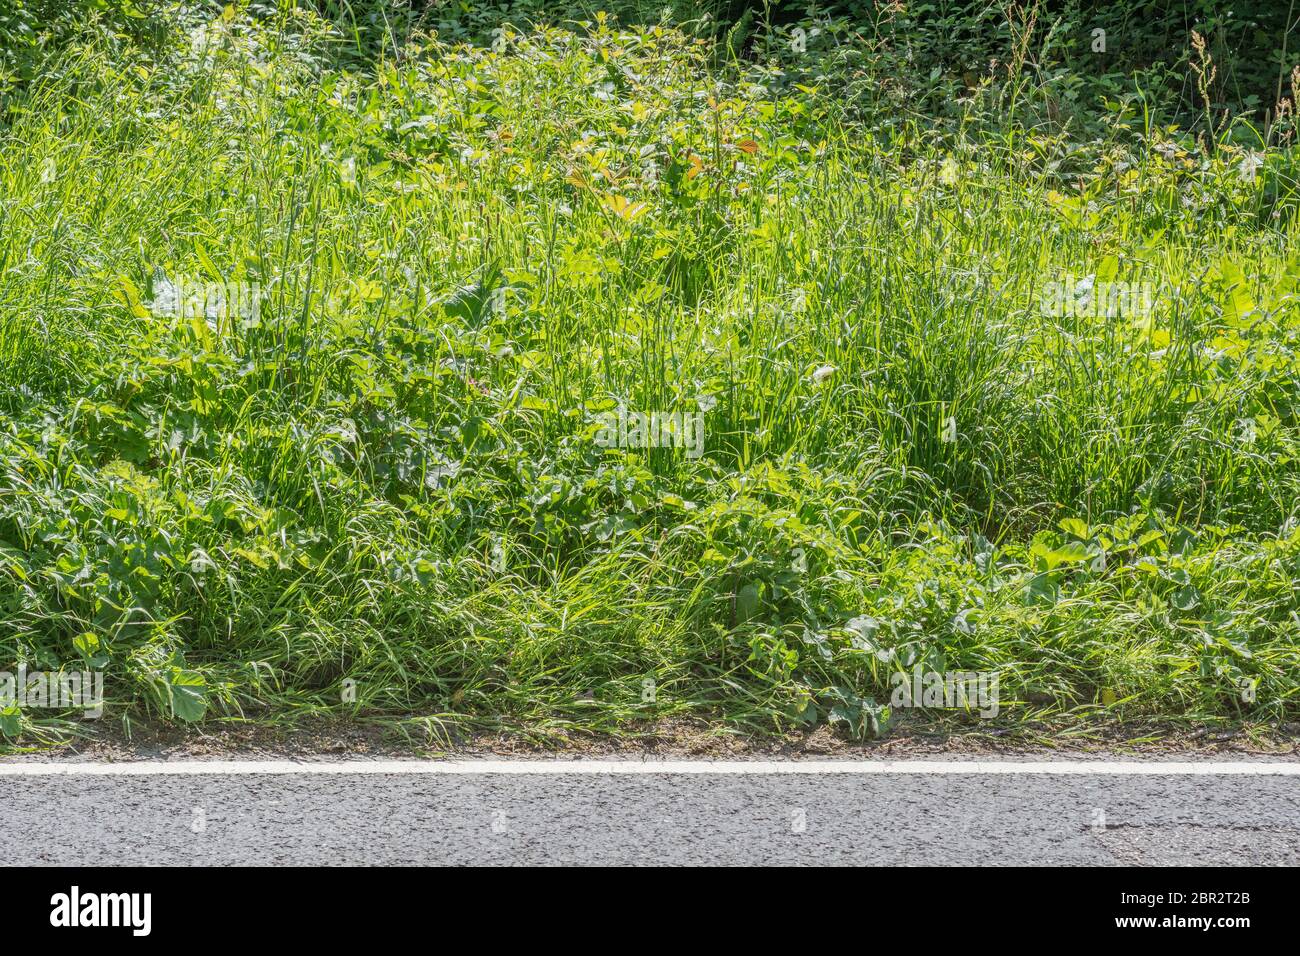 Mass of roadside weeds engulfing the grass verge of a rural country road in sunshine. Metaphor overgrown, swamped, weeds, surrounded on all sides Stock Photo